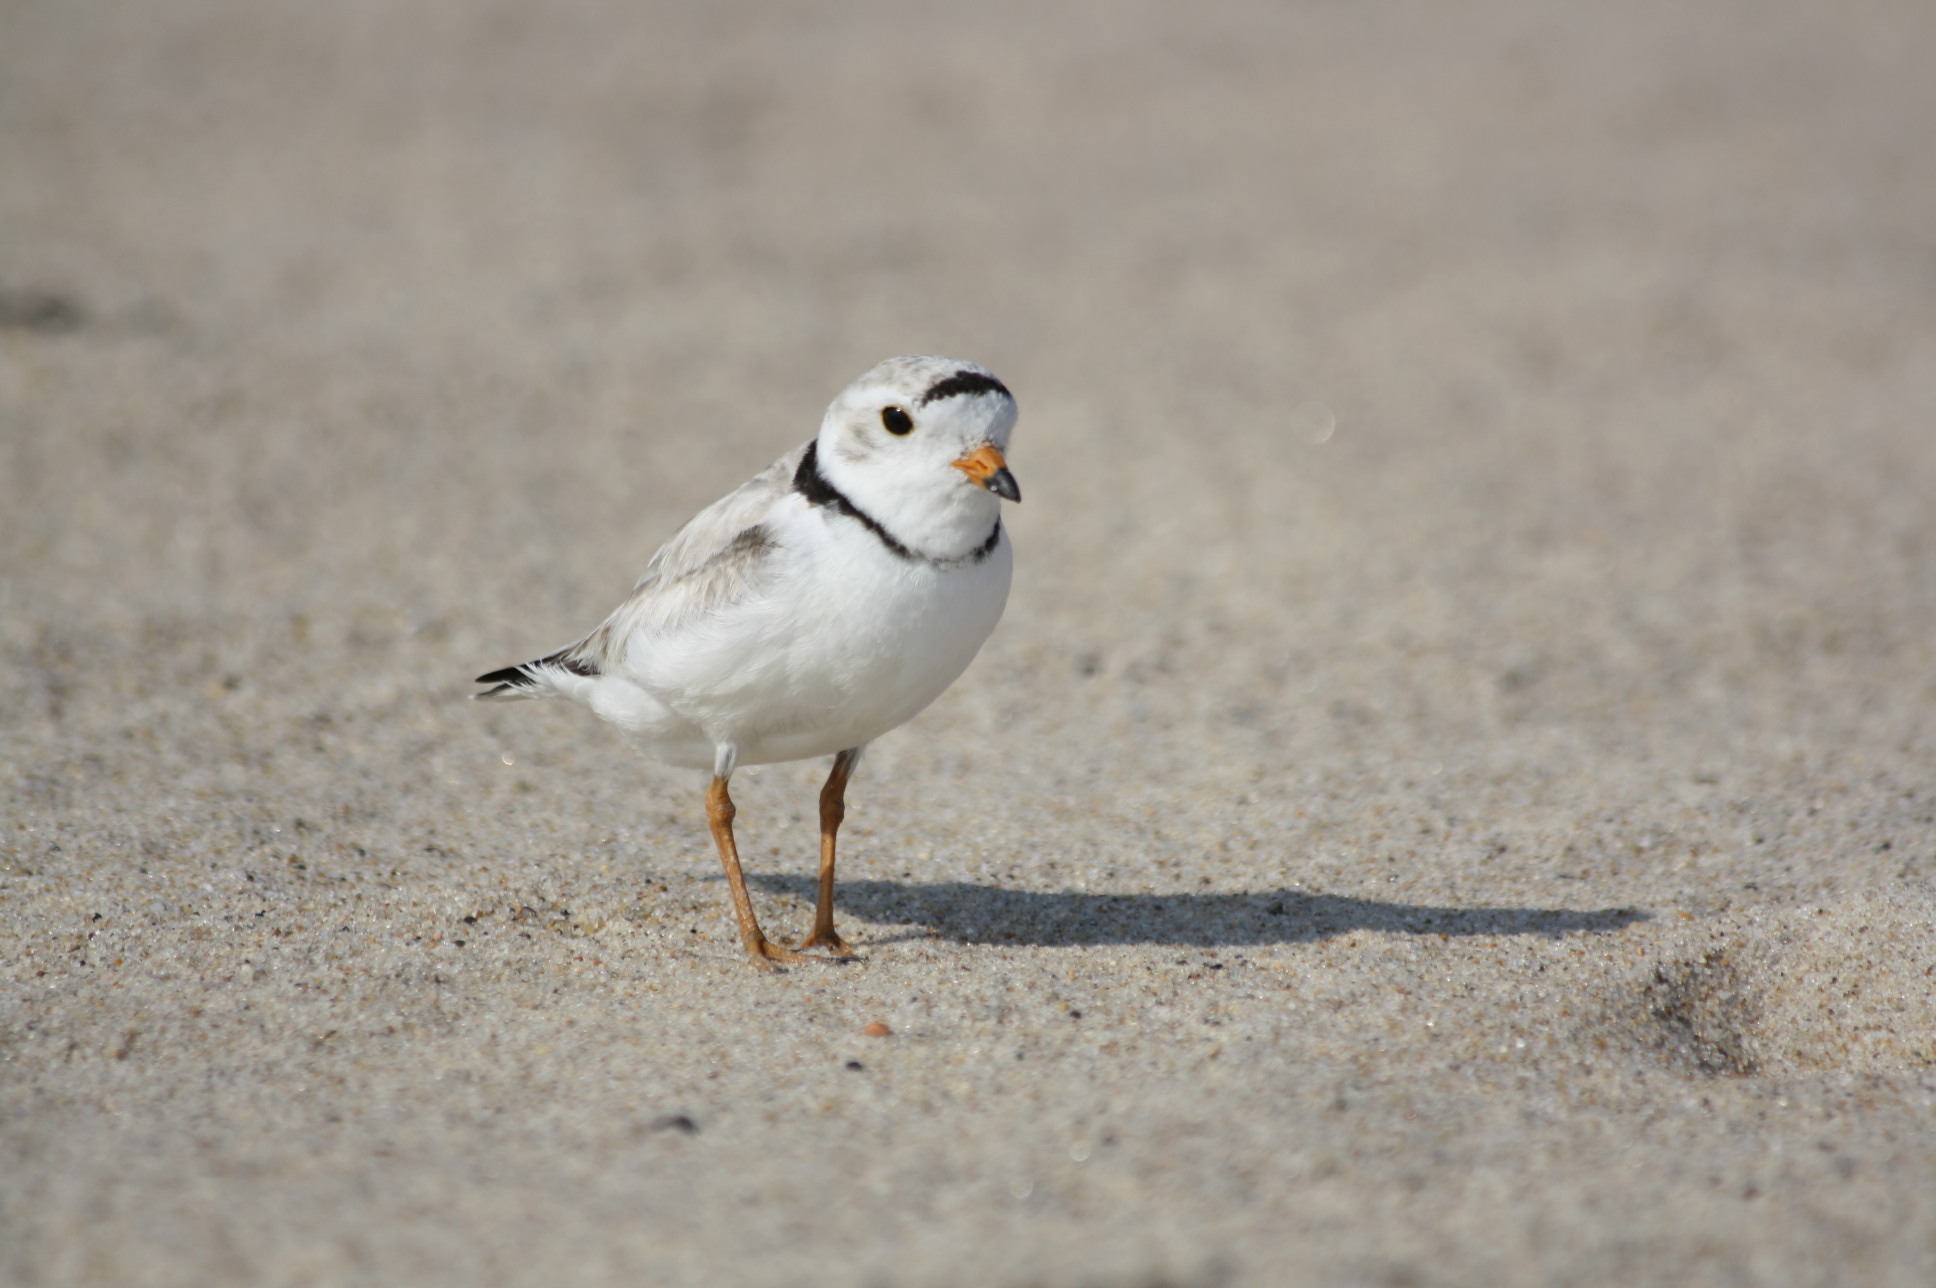 Small white bird with black markings on the beach